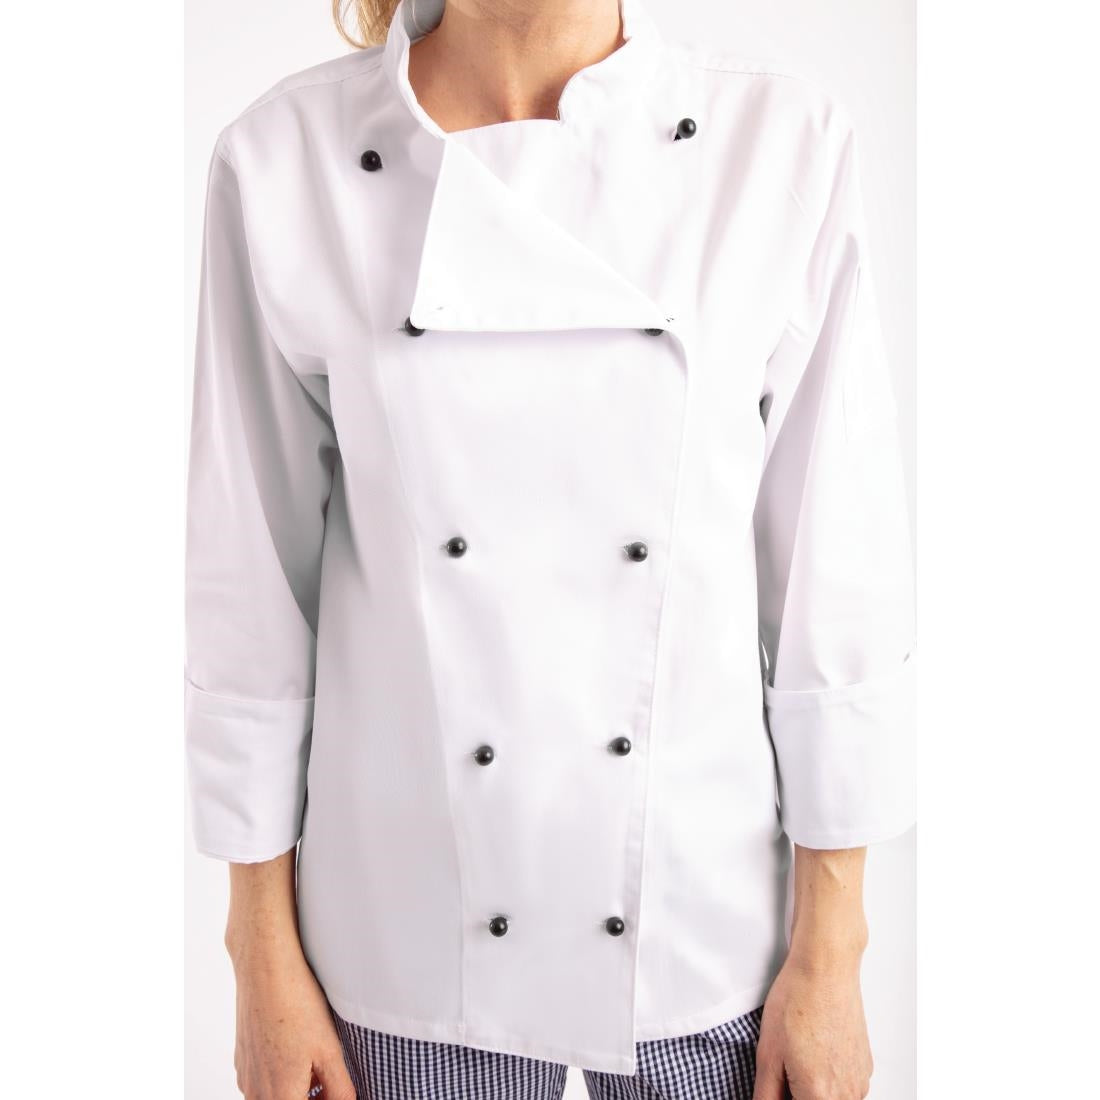 DL710-M Whites Chicago Unisex Chefs Jacket Long Sleeve M JD Catering Equipment Solutions Ltd